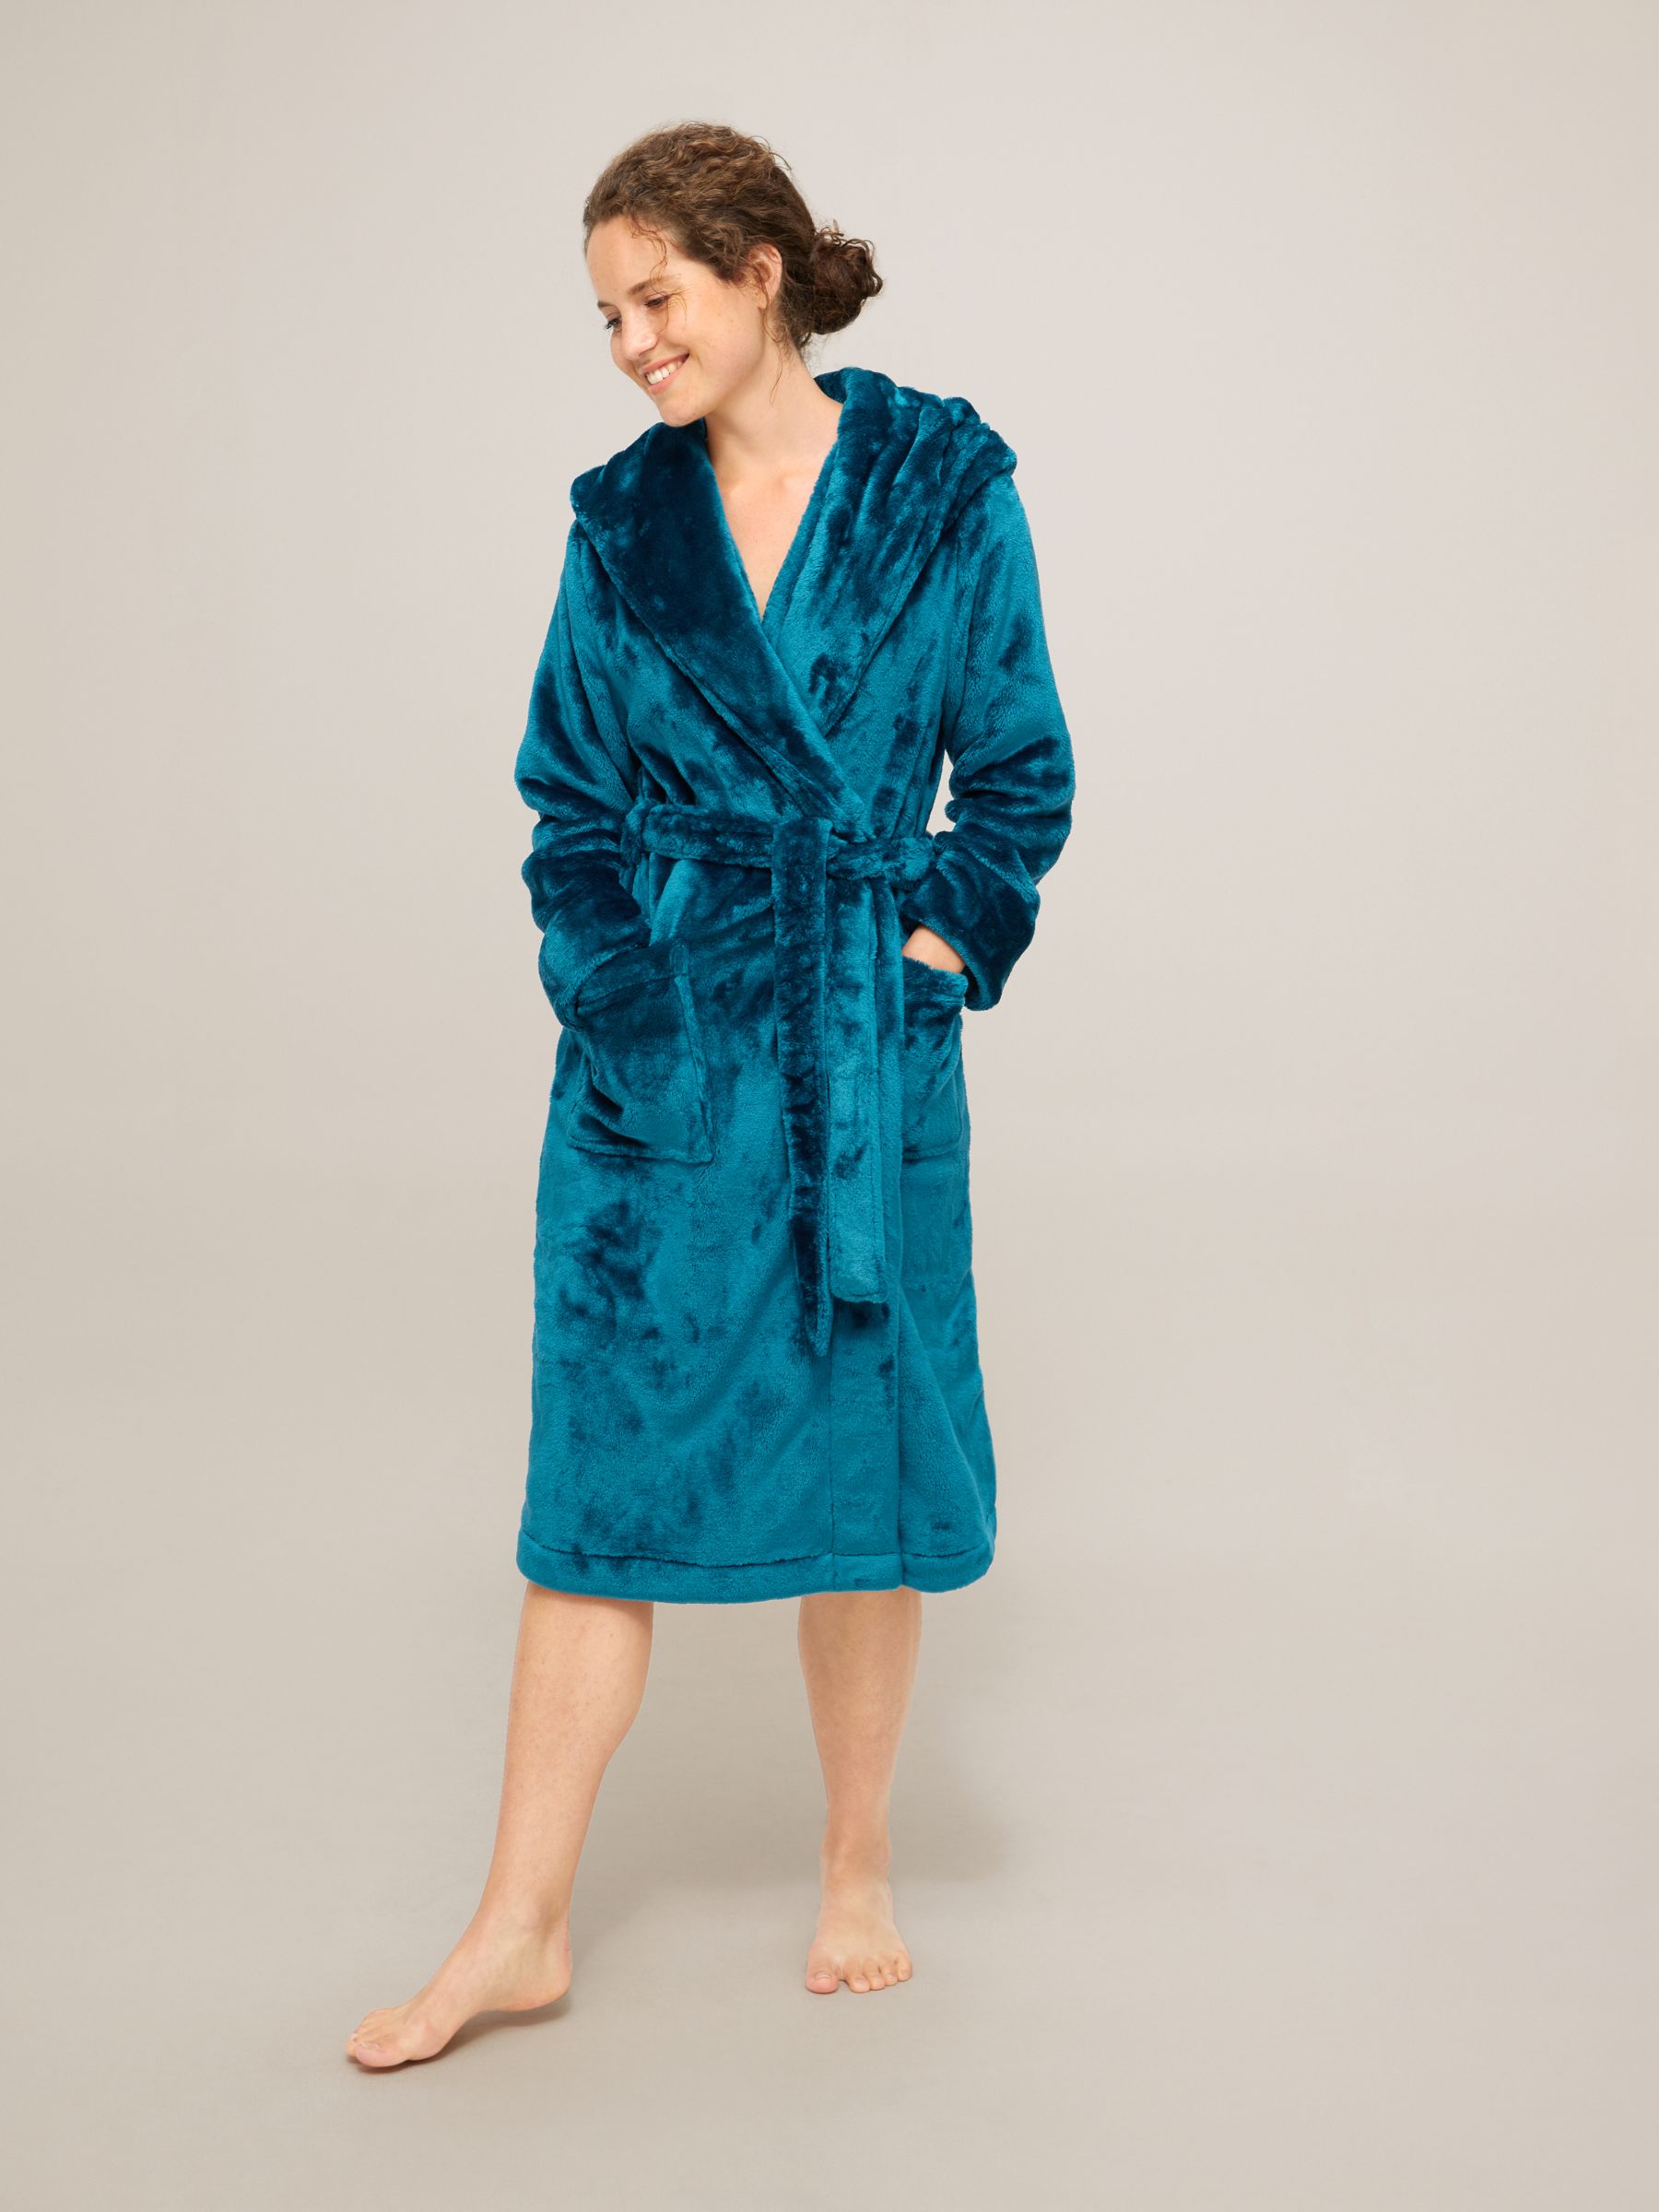 Marks & Spencer Womens Jacquard Embossed New M&S Fleece Dressing Gown Free P&P